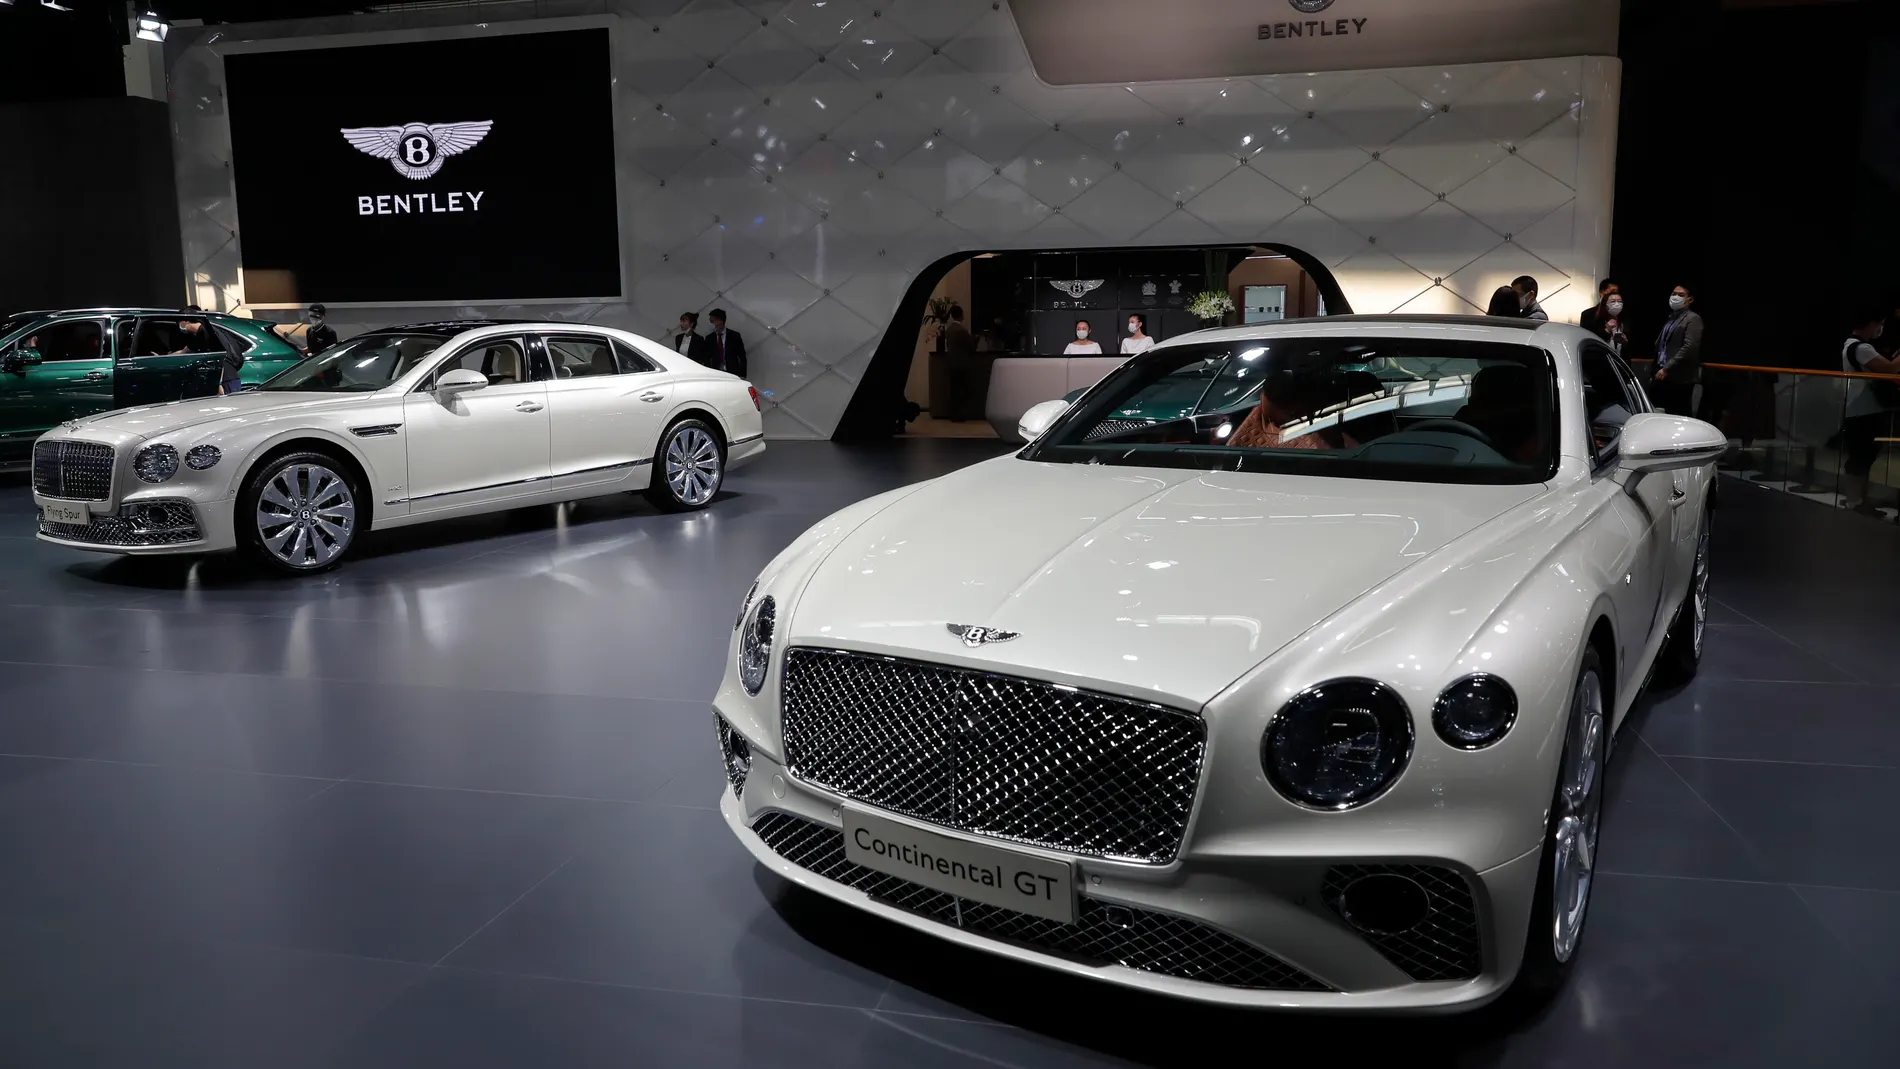 Beijing (China), 26/09/2020.- A Bentley Continental GT car on display at the Beijing International Automotive Exhibition in Beijing, China, 26 September 2020. The exhibition also known as Auto China, is held from 26 September to 05 October 2020. EFE/EPA/WU HONG